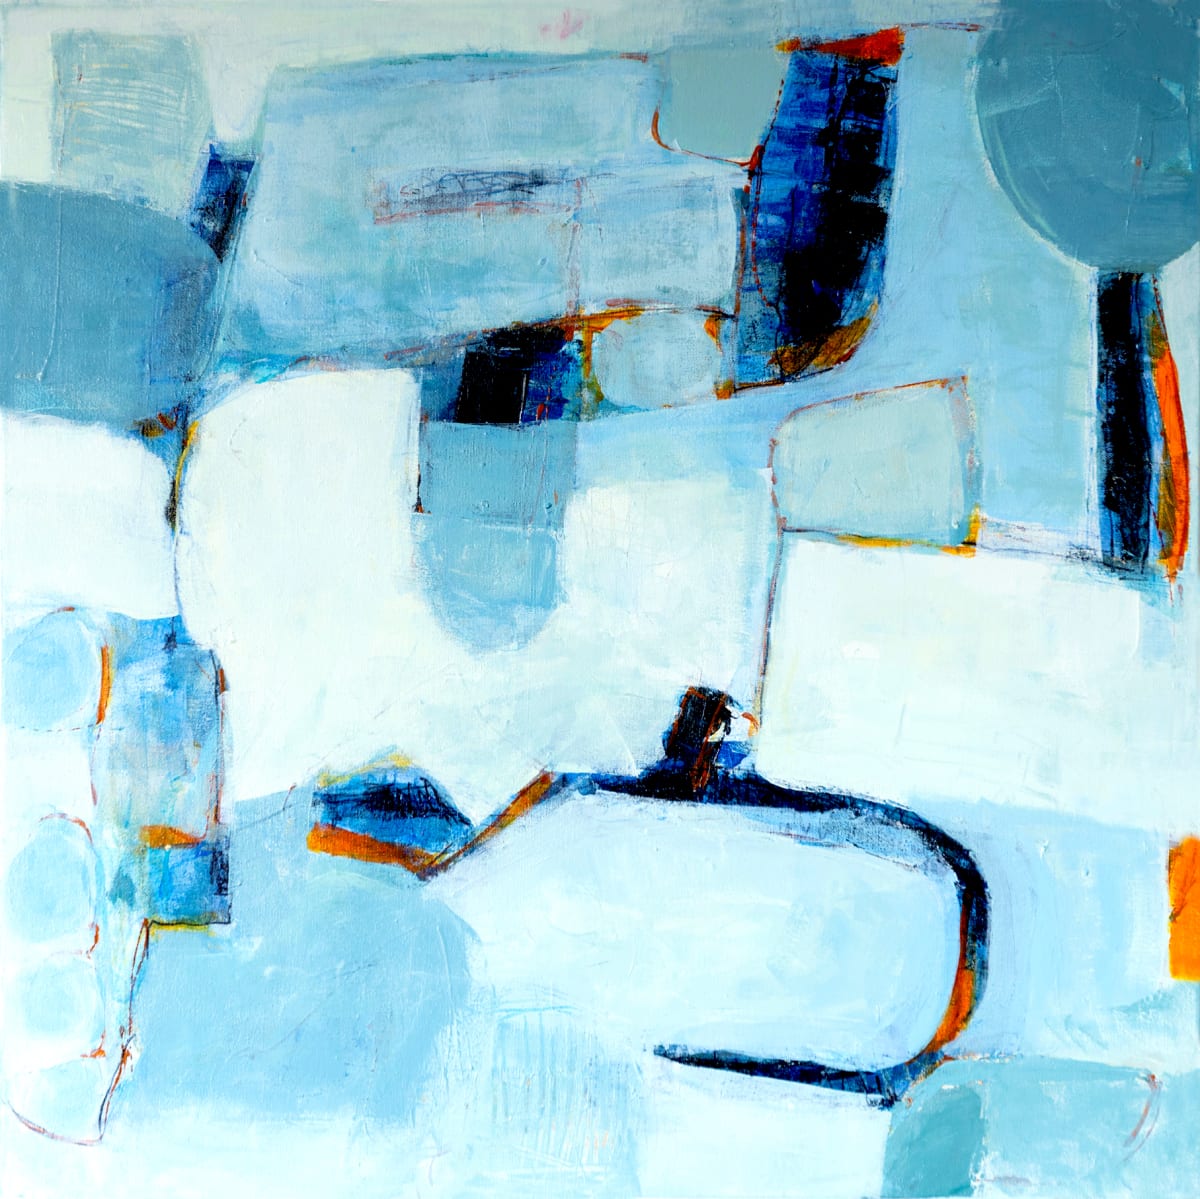 Resting in Blue #1 by Dianne Lofts-Taylor  Image: To rest in the colour blue is a serene and tranquil state of being.